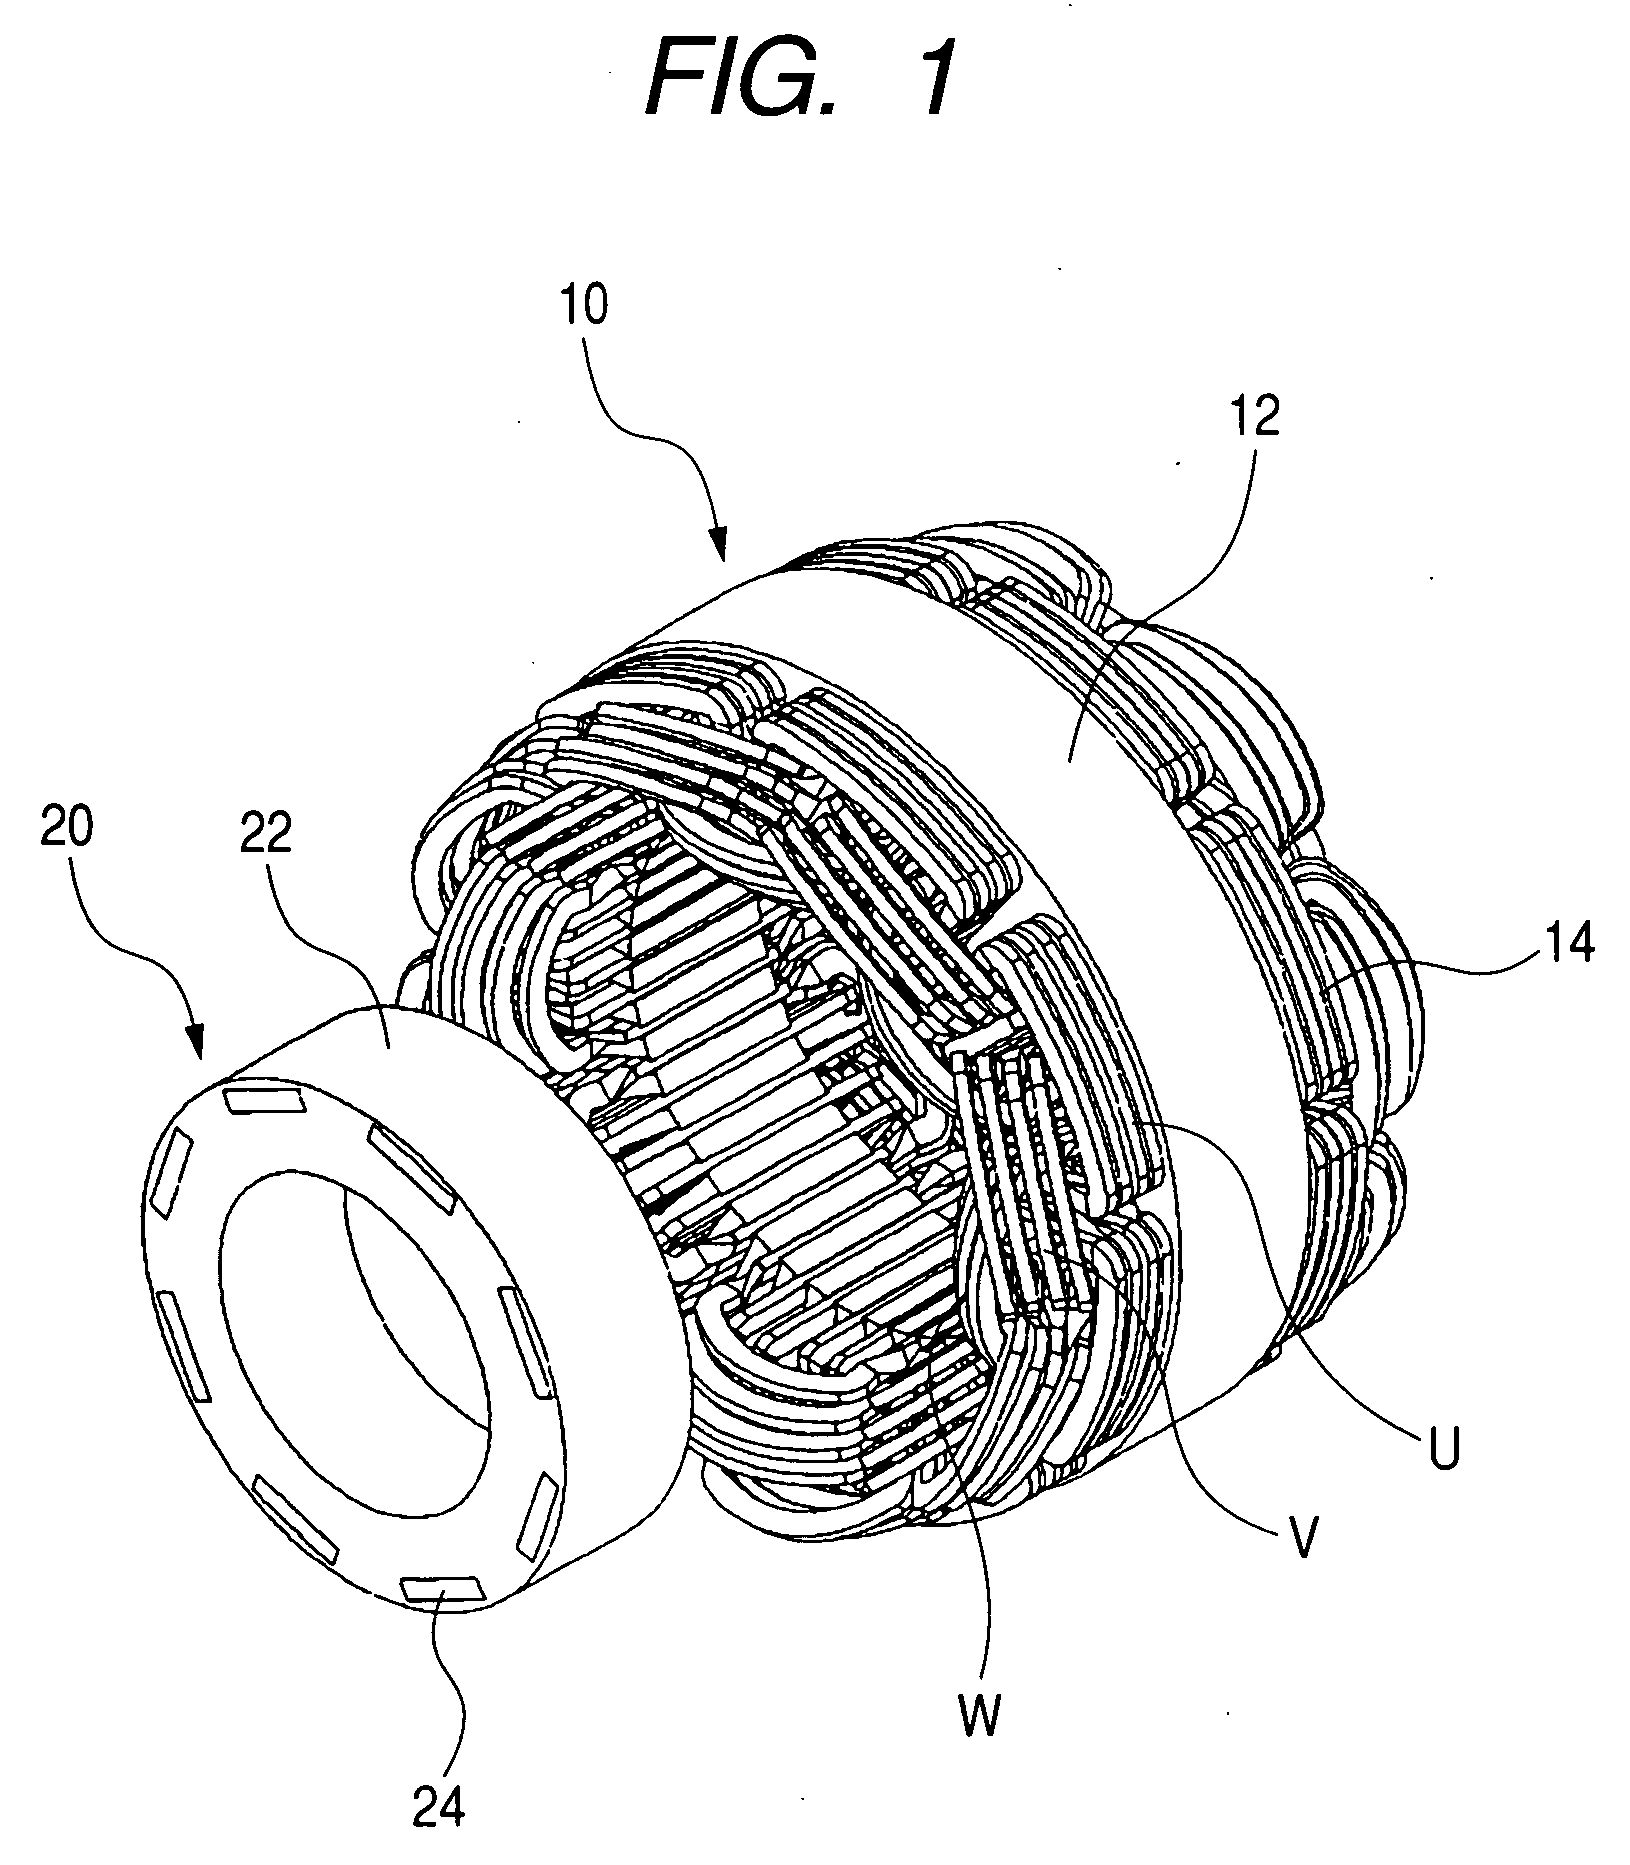 Rotating electrical machine and coil